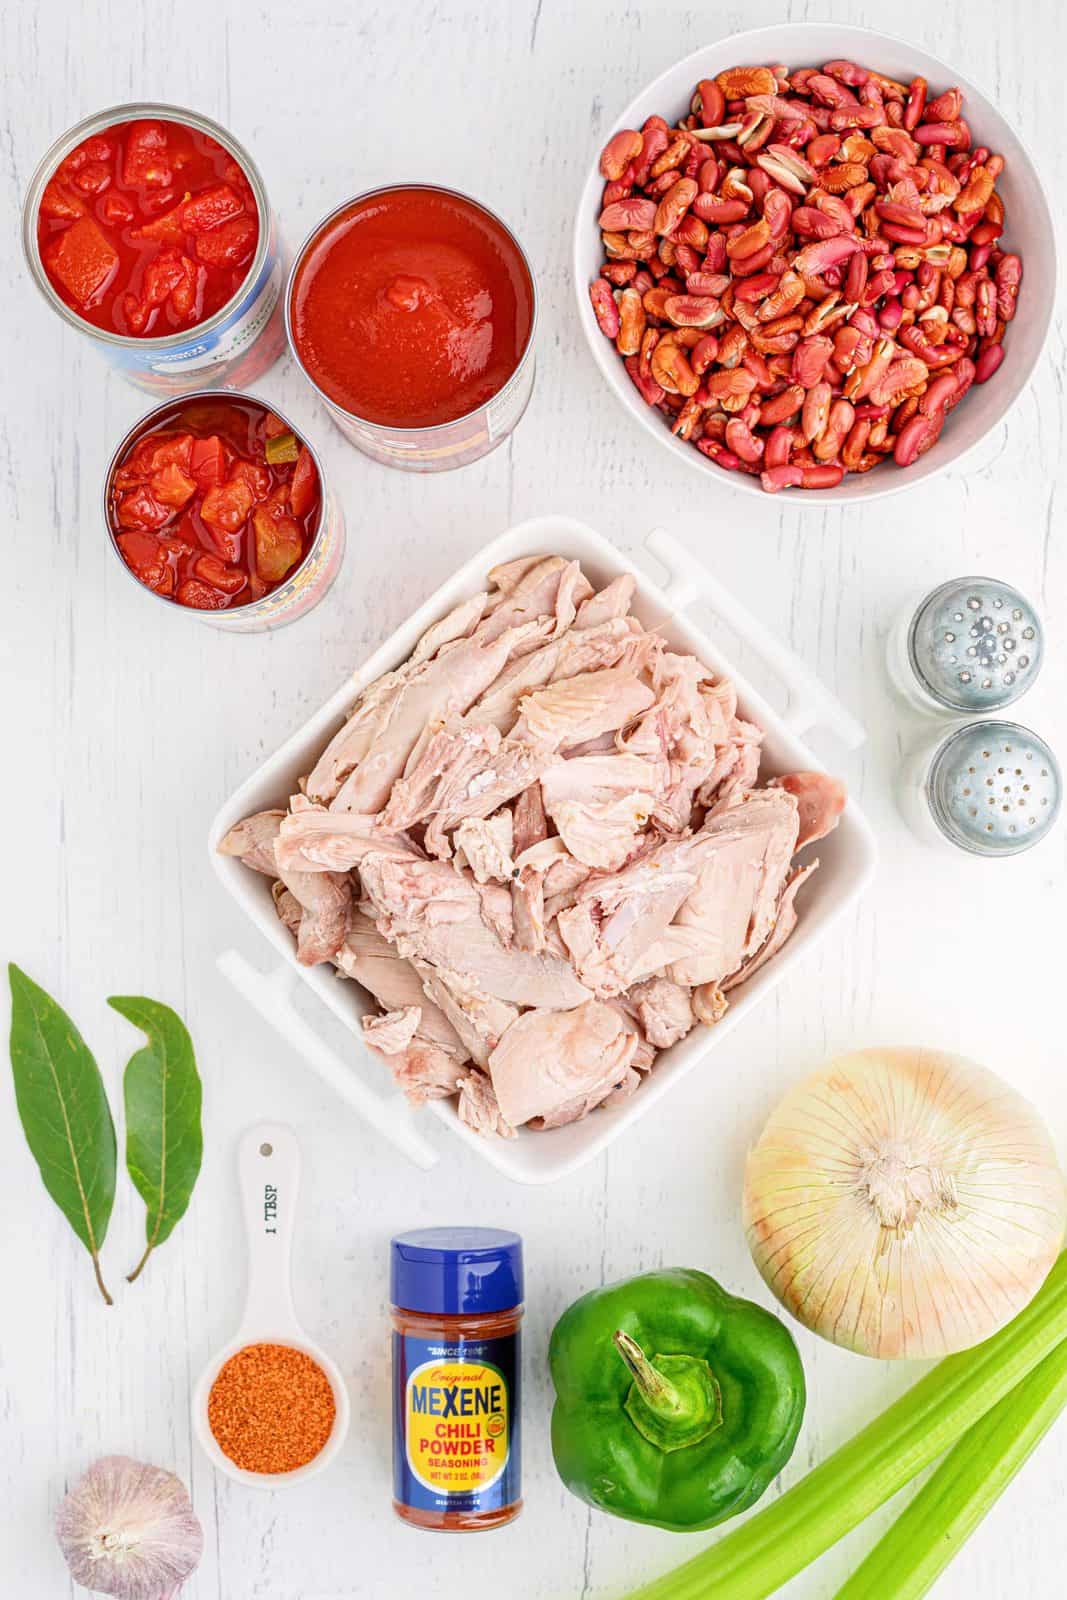 Ingredients needed: leftover roast turkey, dry red kidney beans, chopped tomatoes and chiles, tomato sauce, chopped tomatoes, yellow onions, green bell pepper, celery ribs, garlic, bay leaves, creole seasoning, Mexene Chili Seasoning mix, salt and pepper.